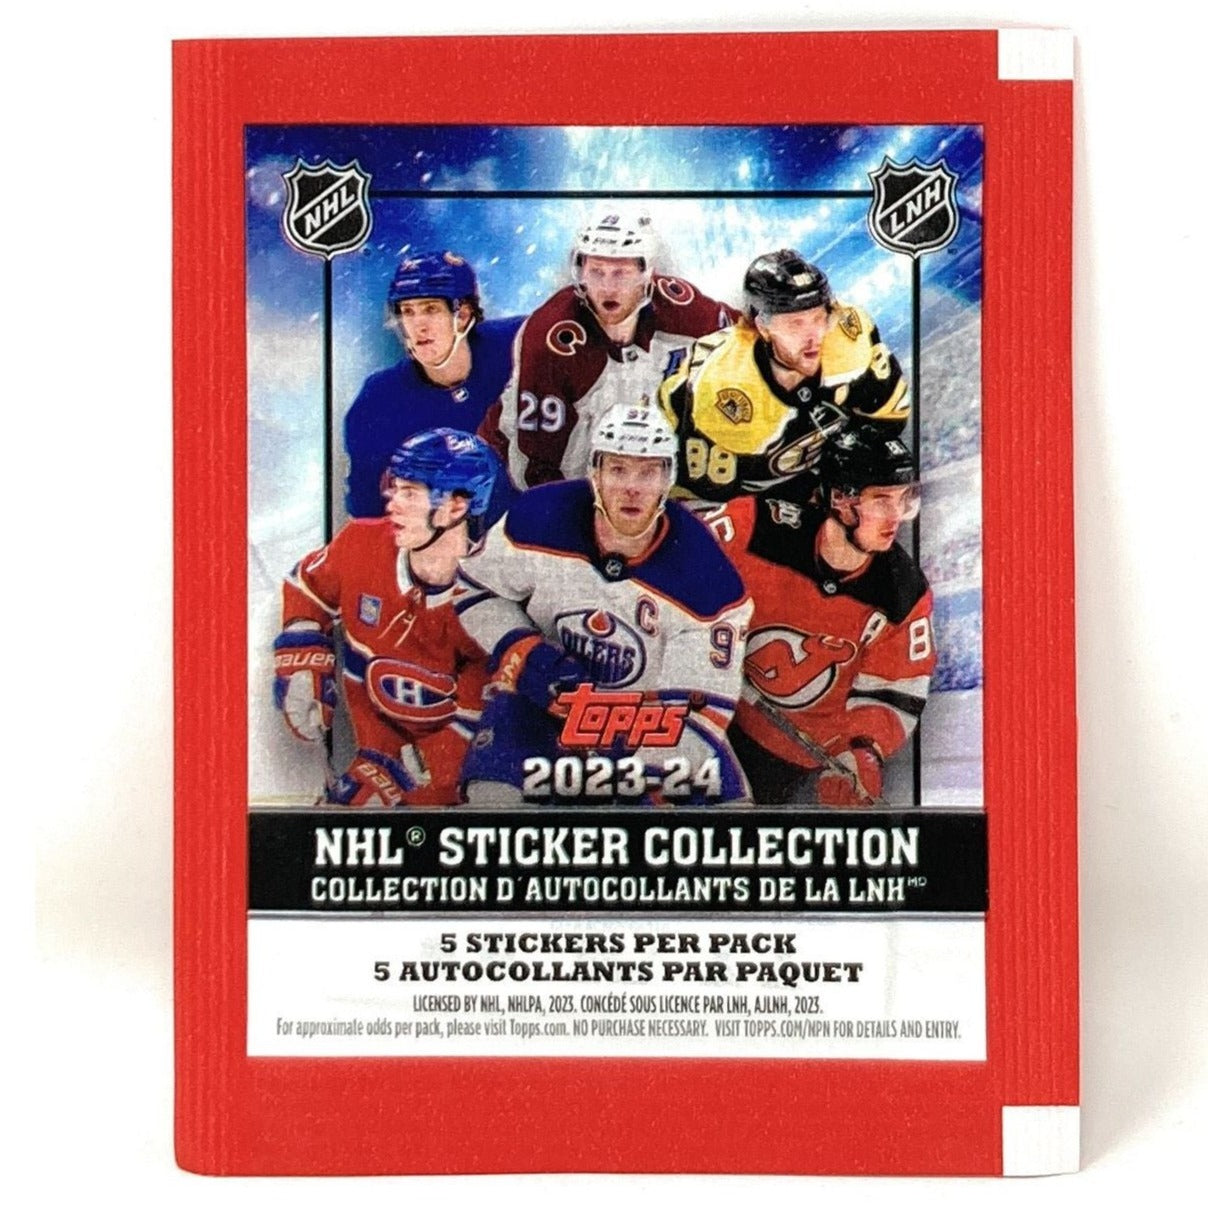 2023-24 Topps NHL Hockey Sticker Collection Box (50 Packs) 887521121632 - King Card Canada